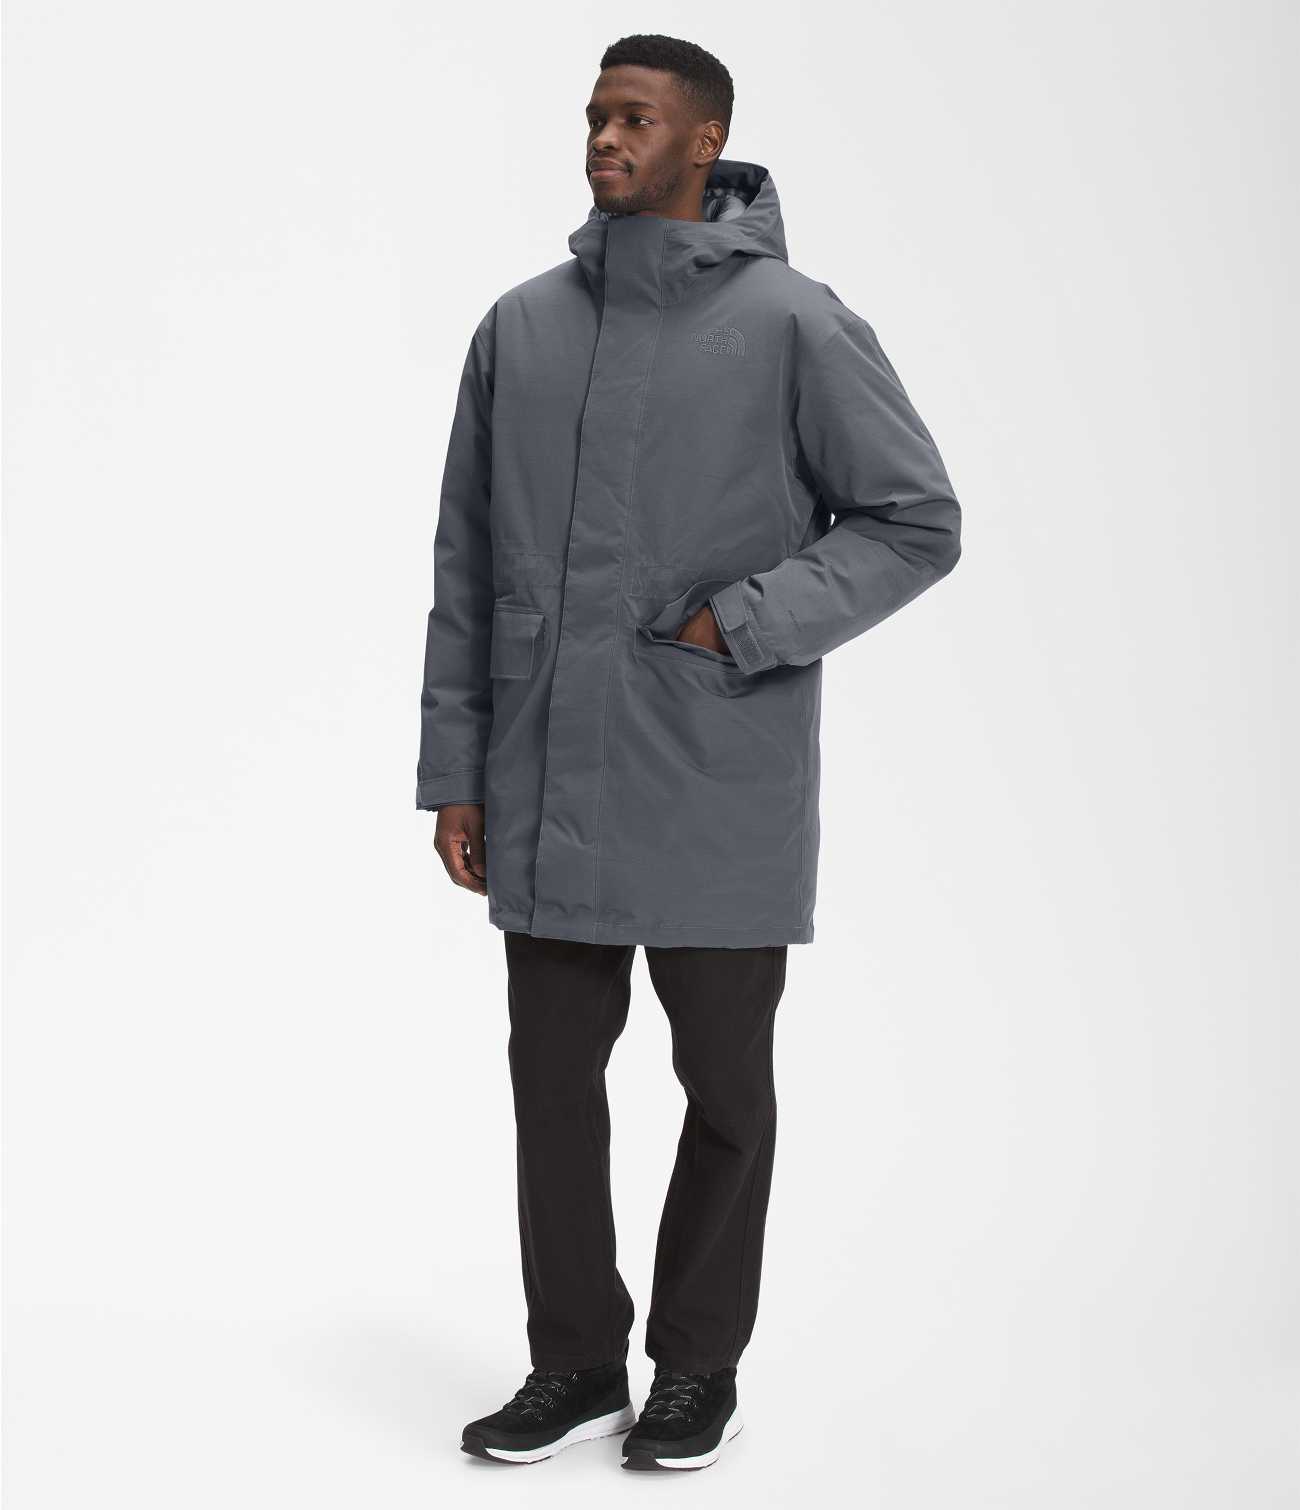 MEN'S EXPEDITION ARCTIC PARKA | The North Face | The North Face